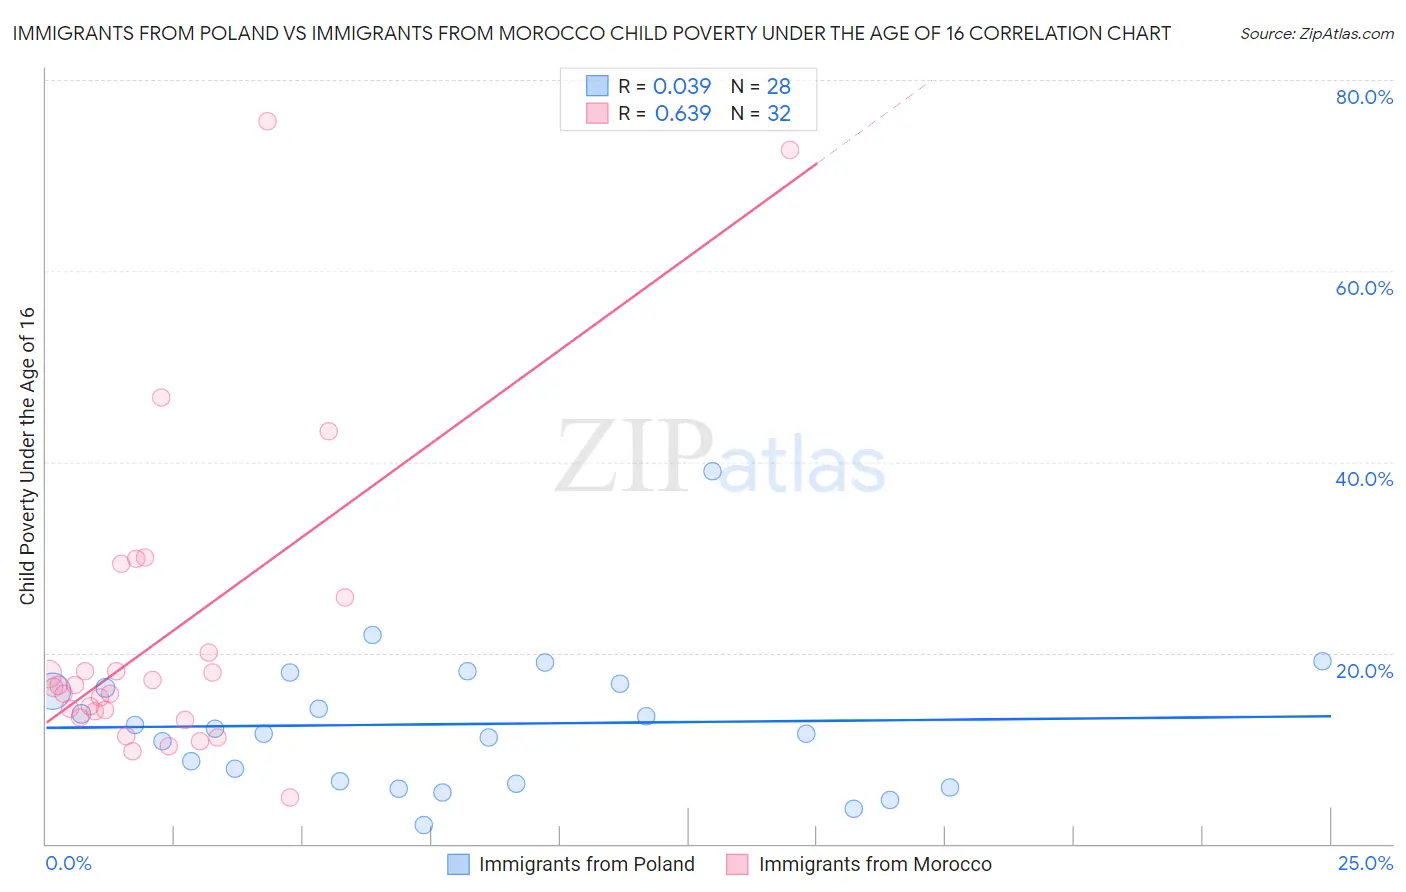 Immigrants from Poland vs Immigrants from Morocco Child Poverty Under the Age of 16